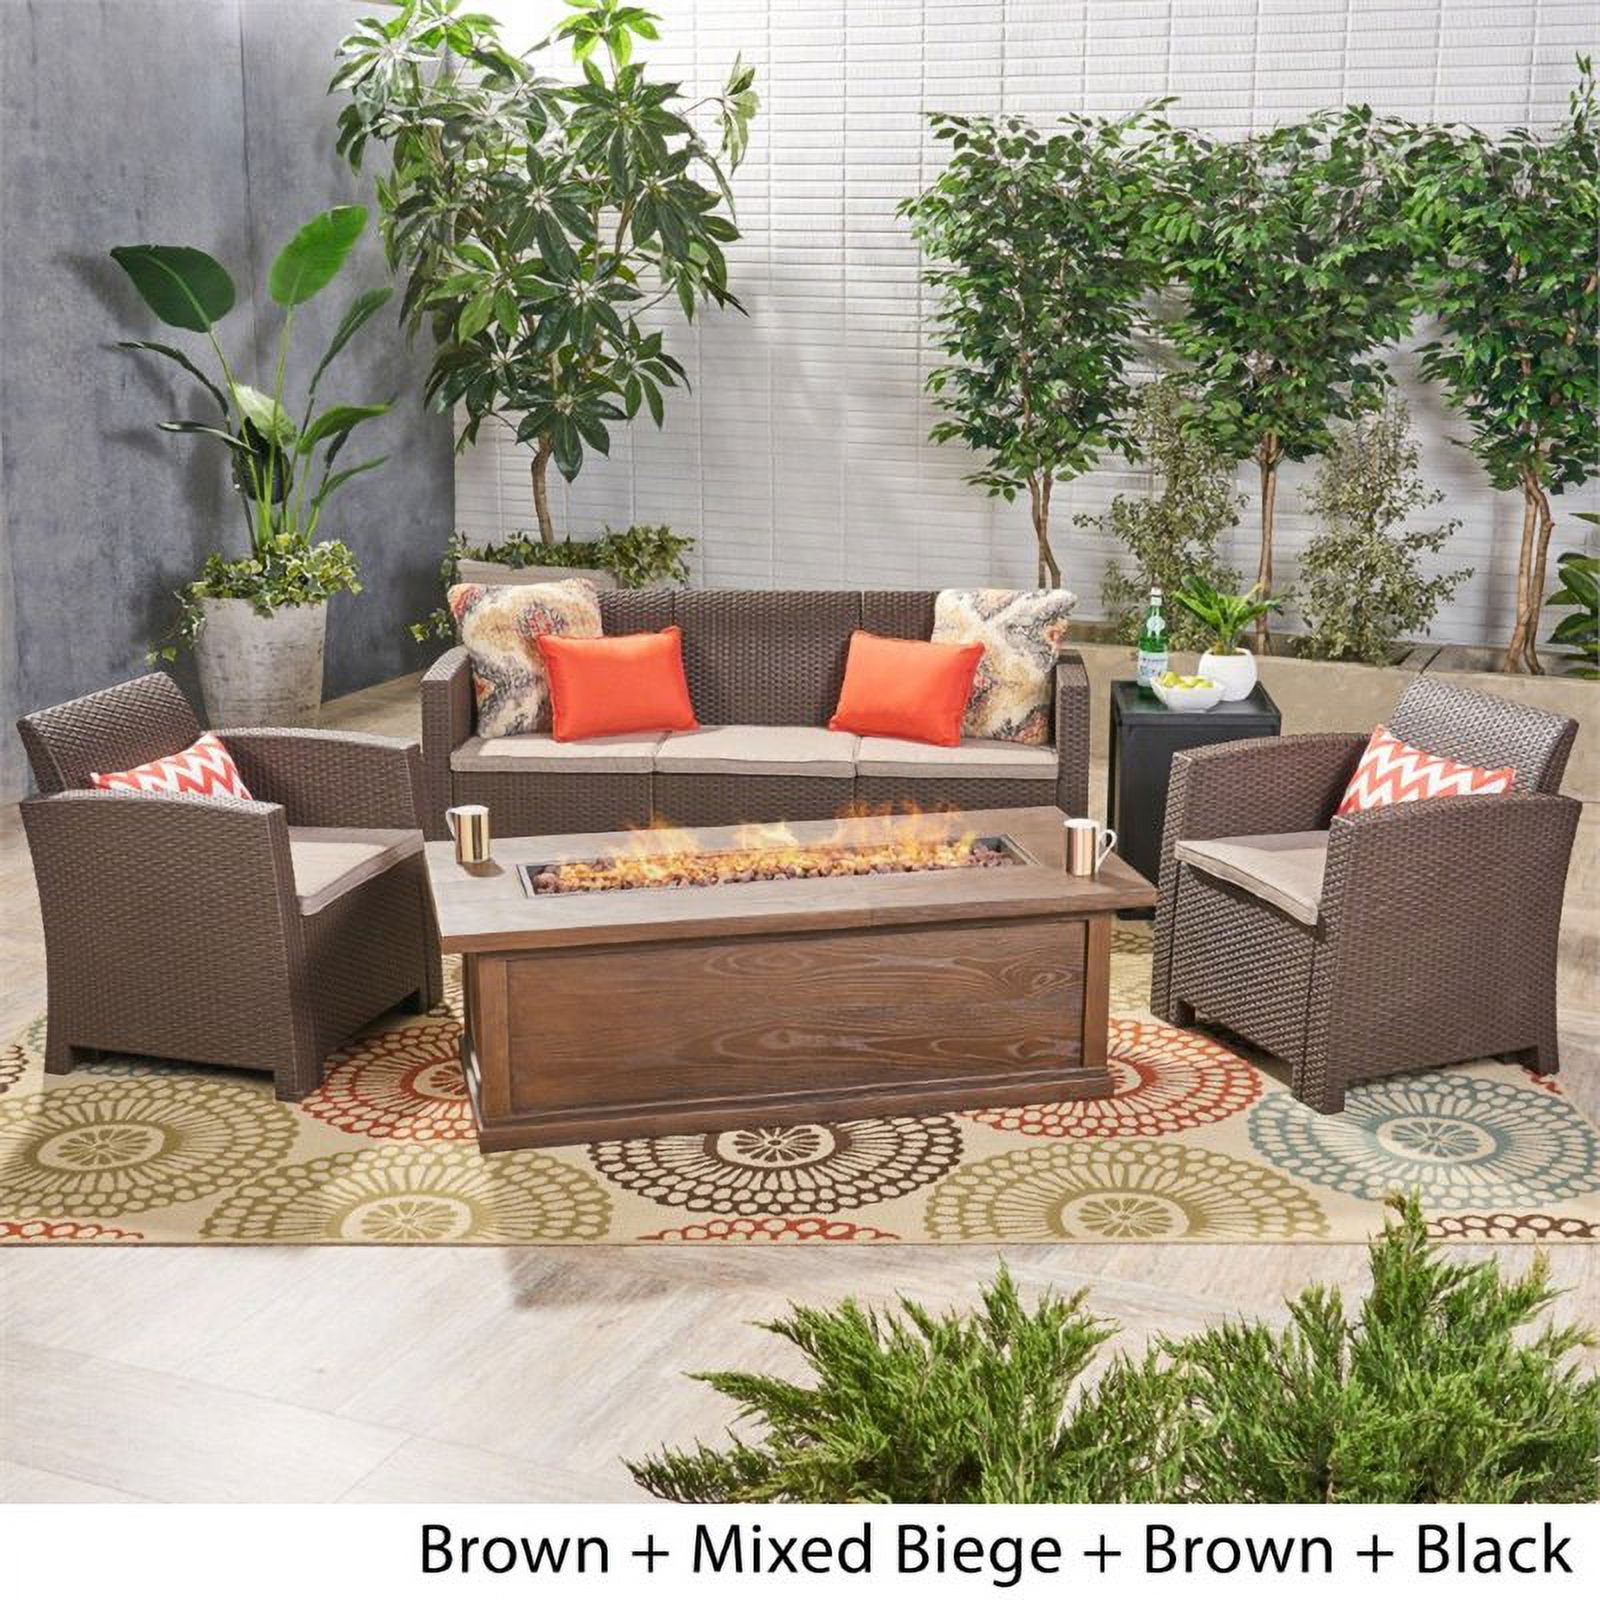 Antonio Outdoor 5 Piece Wicker Print Chat Set with Wood Finished Fire Pit and Tank Holder, Brown, Mixed Biege, Brown, Black - image 3 of 12